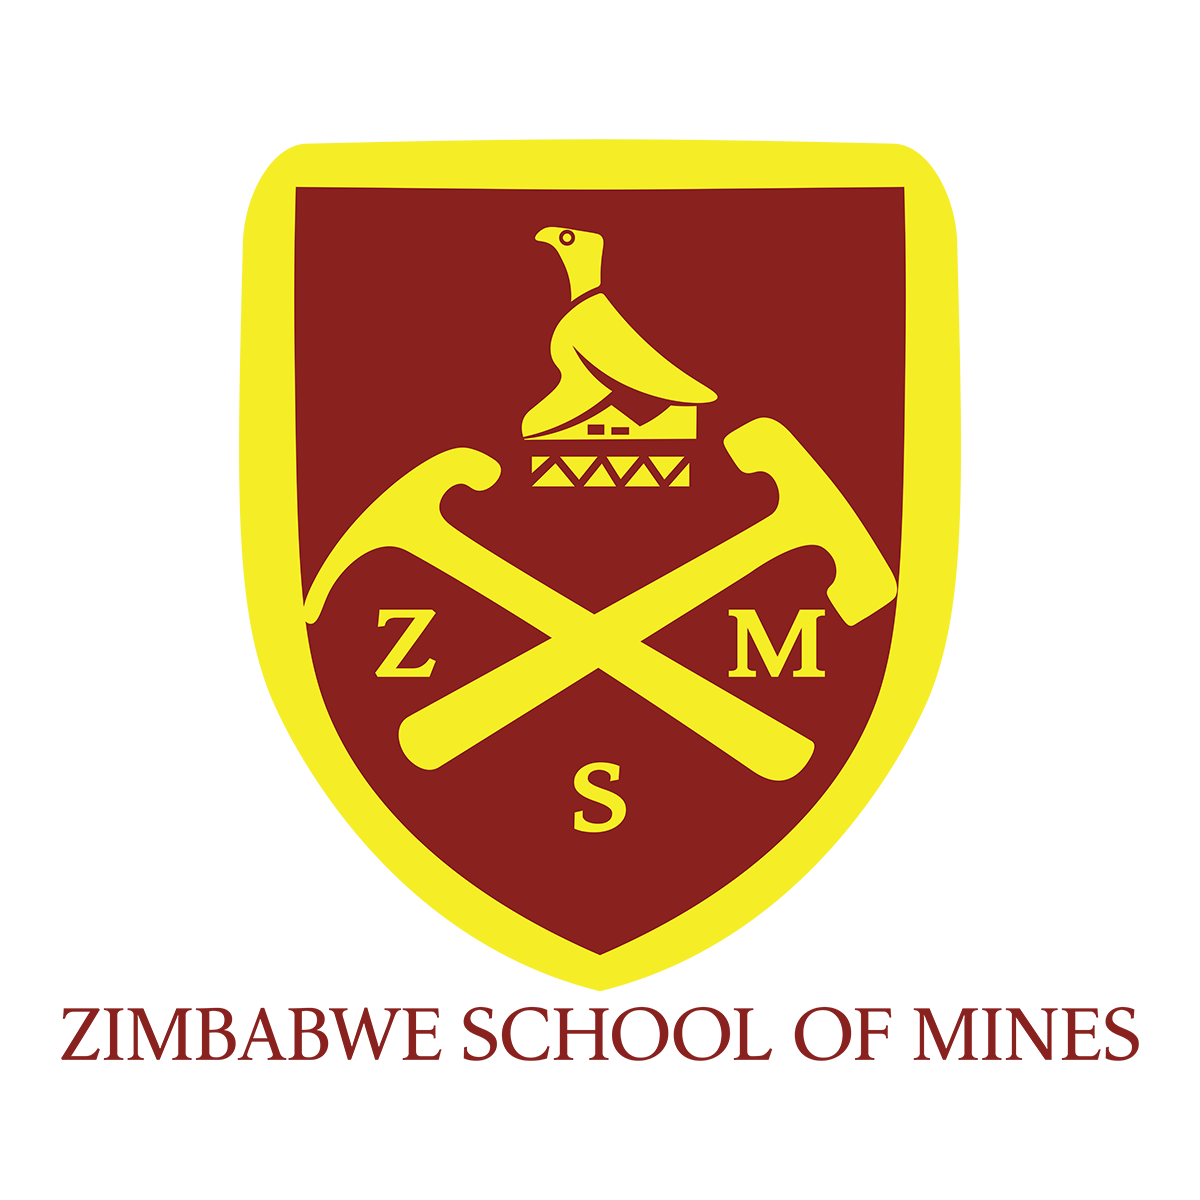 Read more about the article Zimbabwe School of Mines Logo